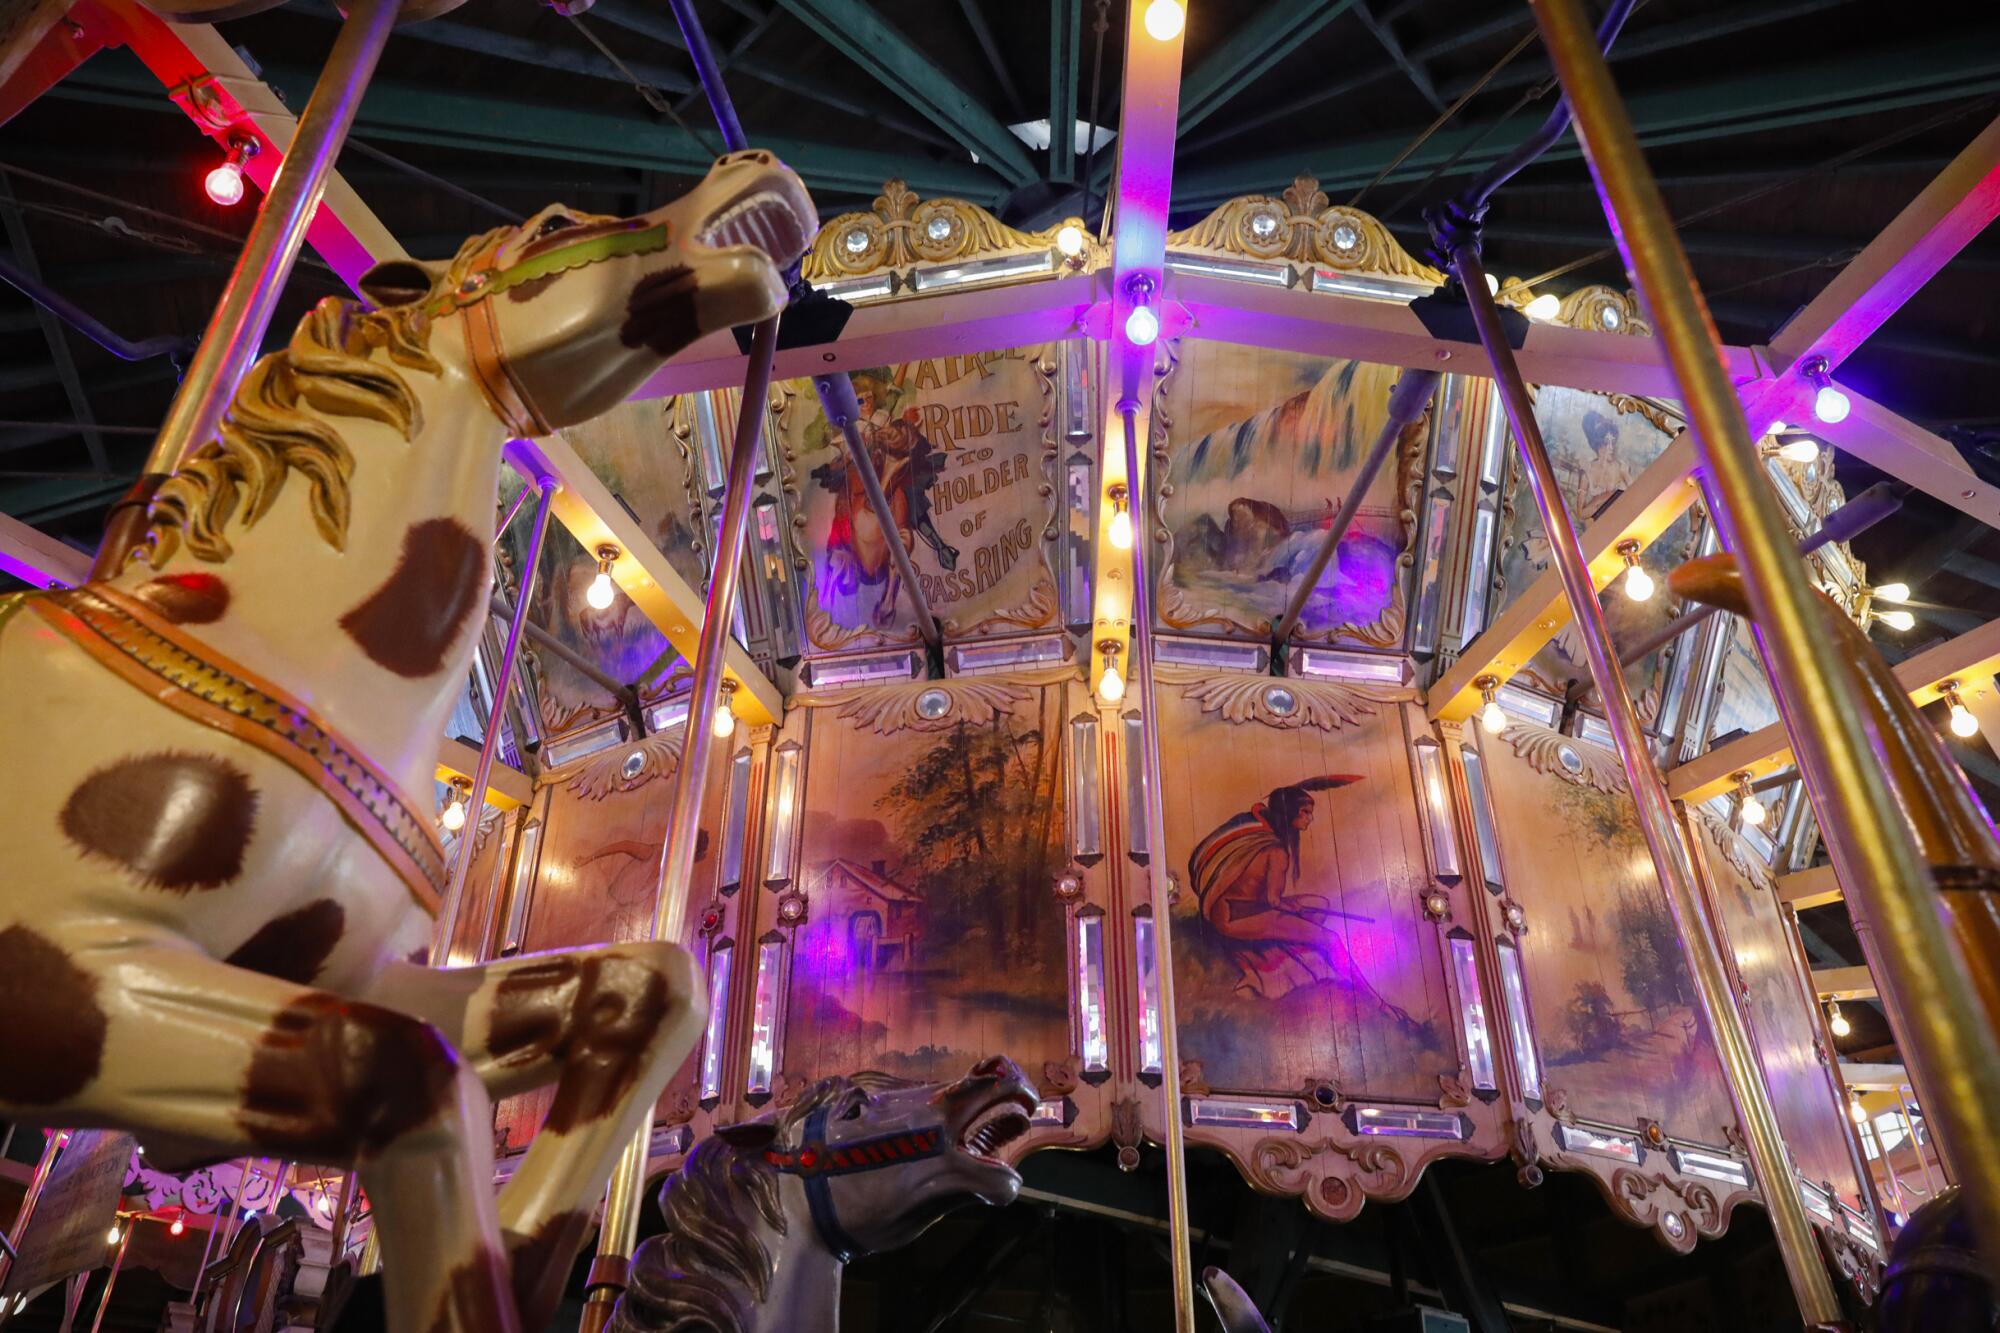 The Balboa Park carousel will mark its 100th anniversary in the park this month.